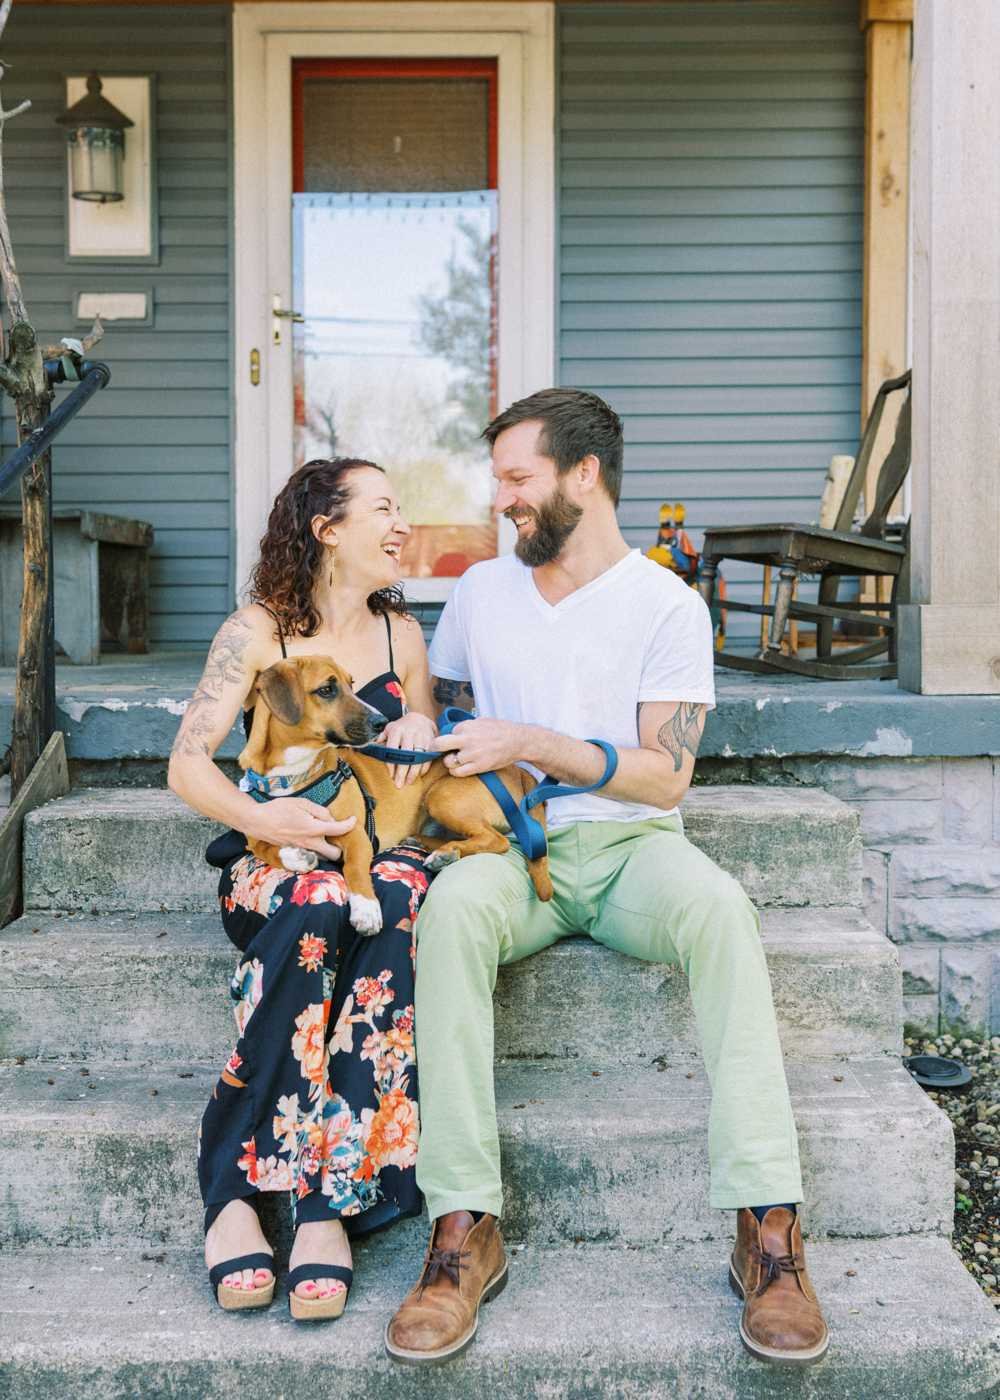 A husband and wife sit on the front steps of their house with their dog